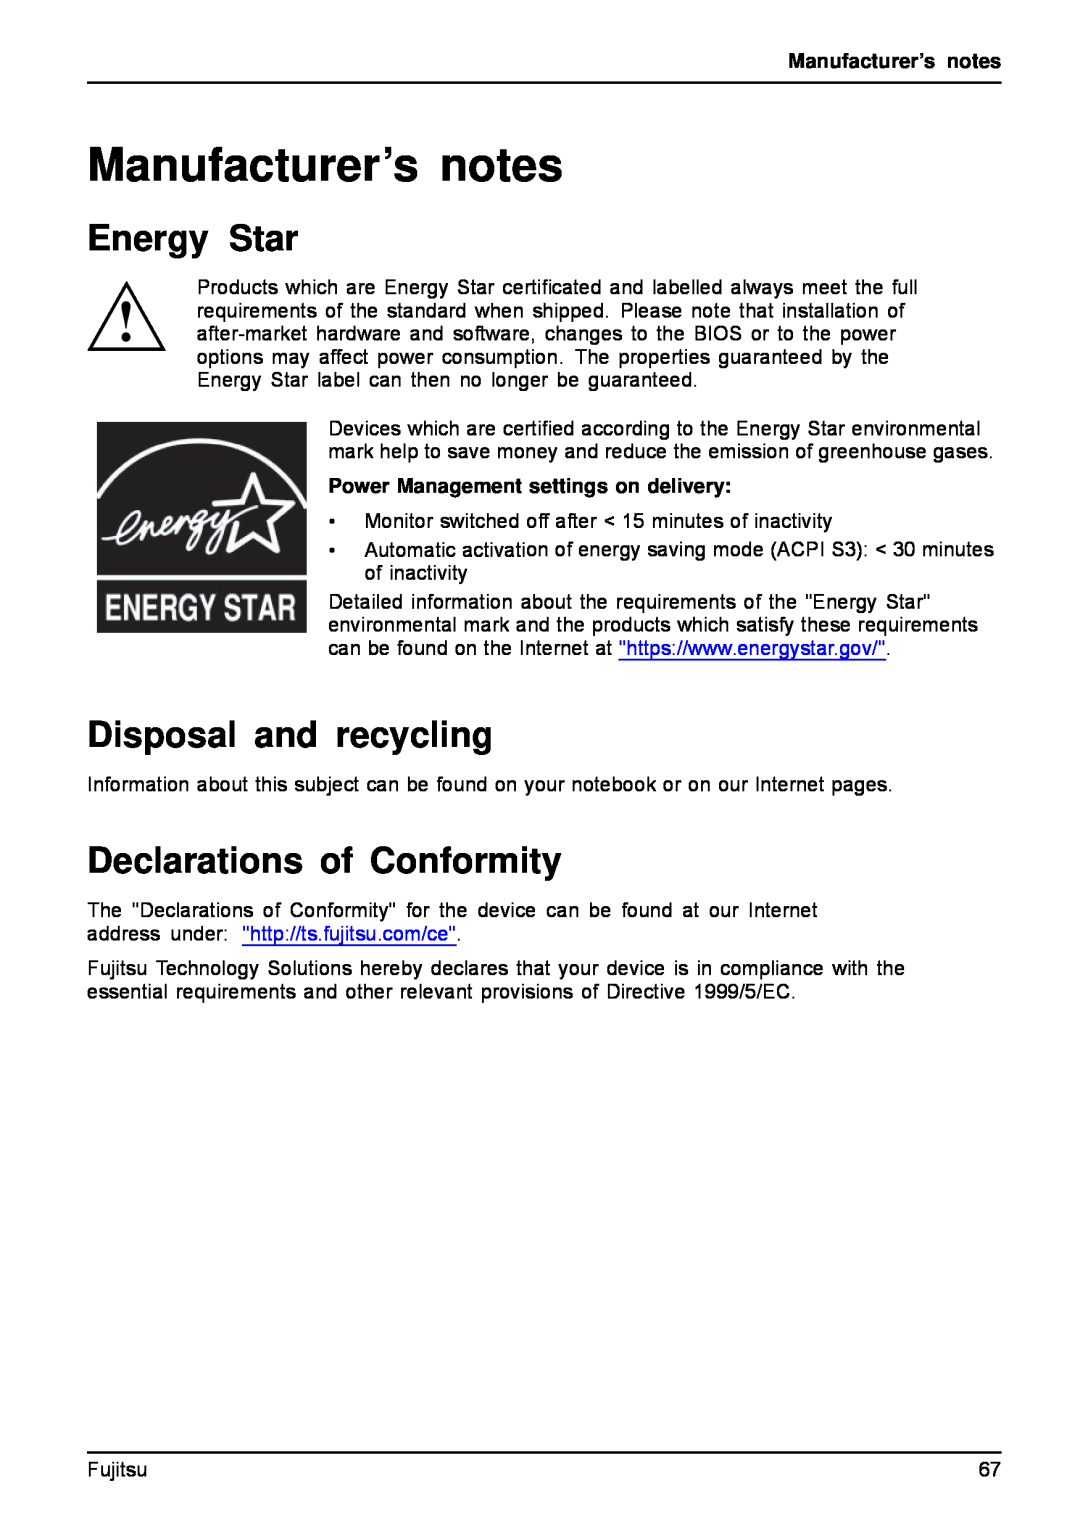 Fujitsu A512, AH512 manual Manufacturer’s notes, Energy Star, Disposal and recycling, Declarations of Conformity 